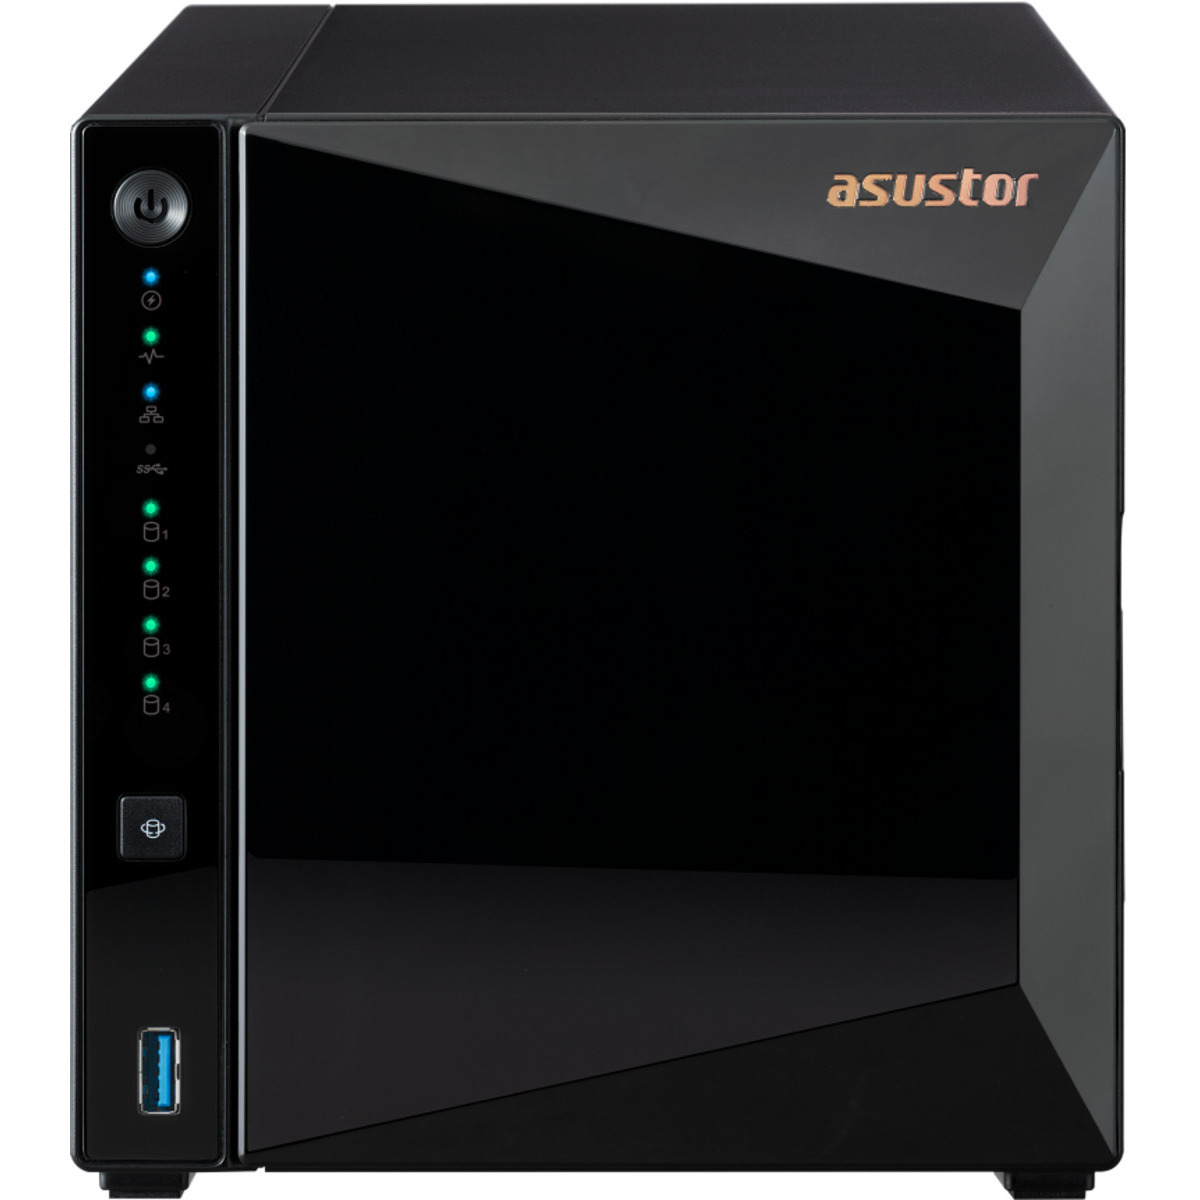 ASUSTOR DRIVESTOR 4 Pro Gen2 AS3304T v2 48tb 4-Bay Desktop Personal / Basic Home / Small Office NAS - Network Attached Storage Device 3x16tb Seagate IronWolf Pro ST16000NT001 3.5 7200rpm SATA 6Gb/s HDD NAS Class Drives Installed - Burn-In Tested - ON SALE DRIVESTOR 4 Pro Gen2 AS3304T v2